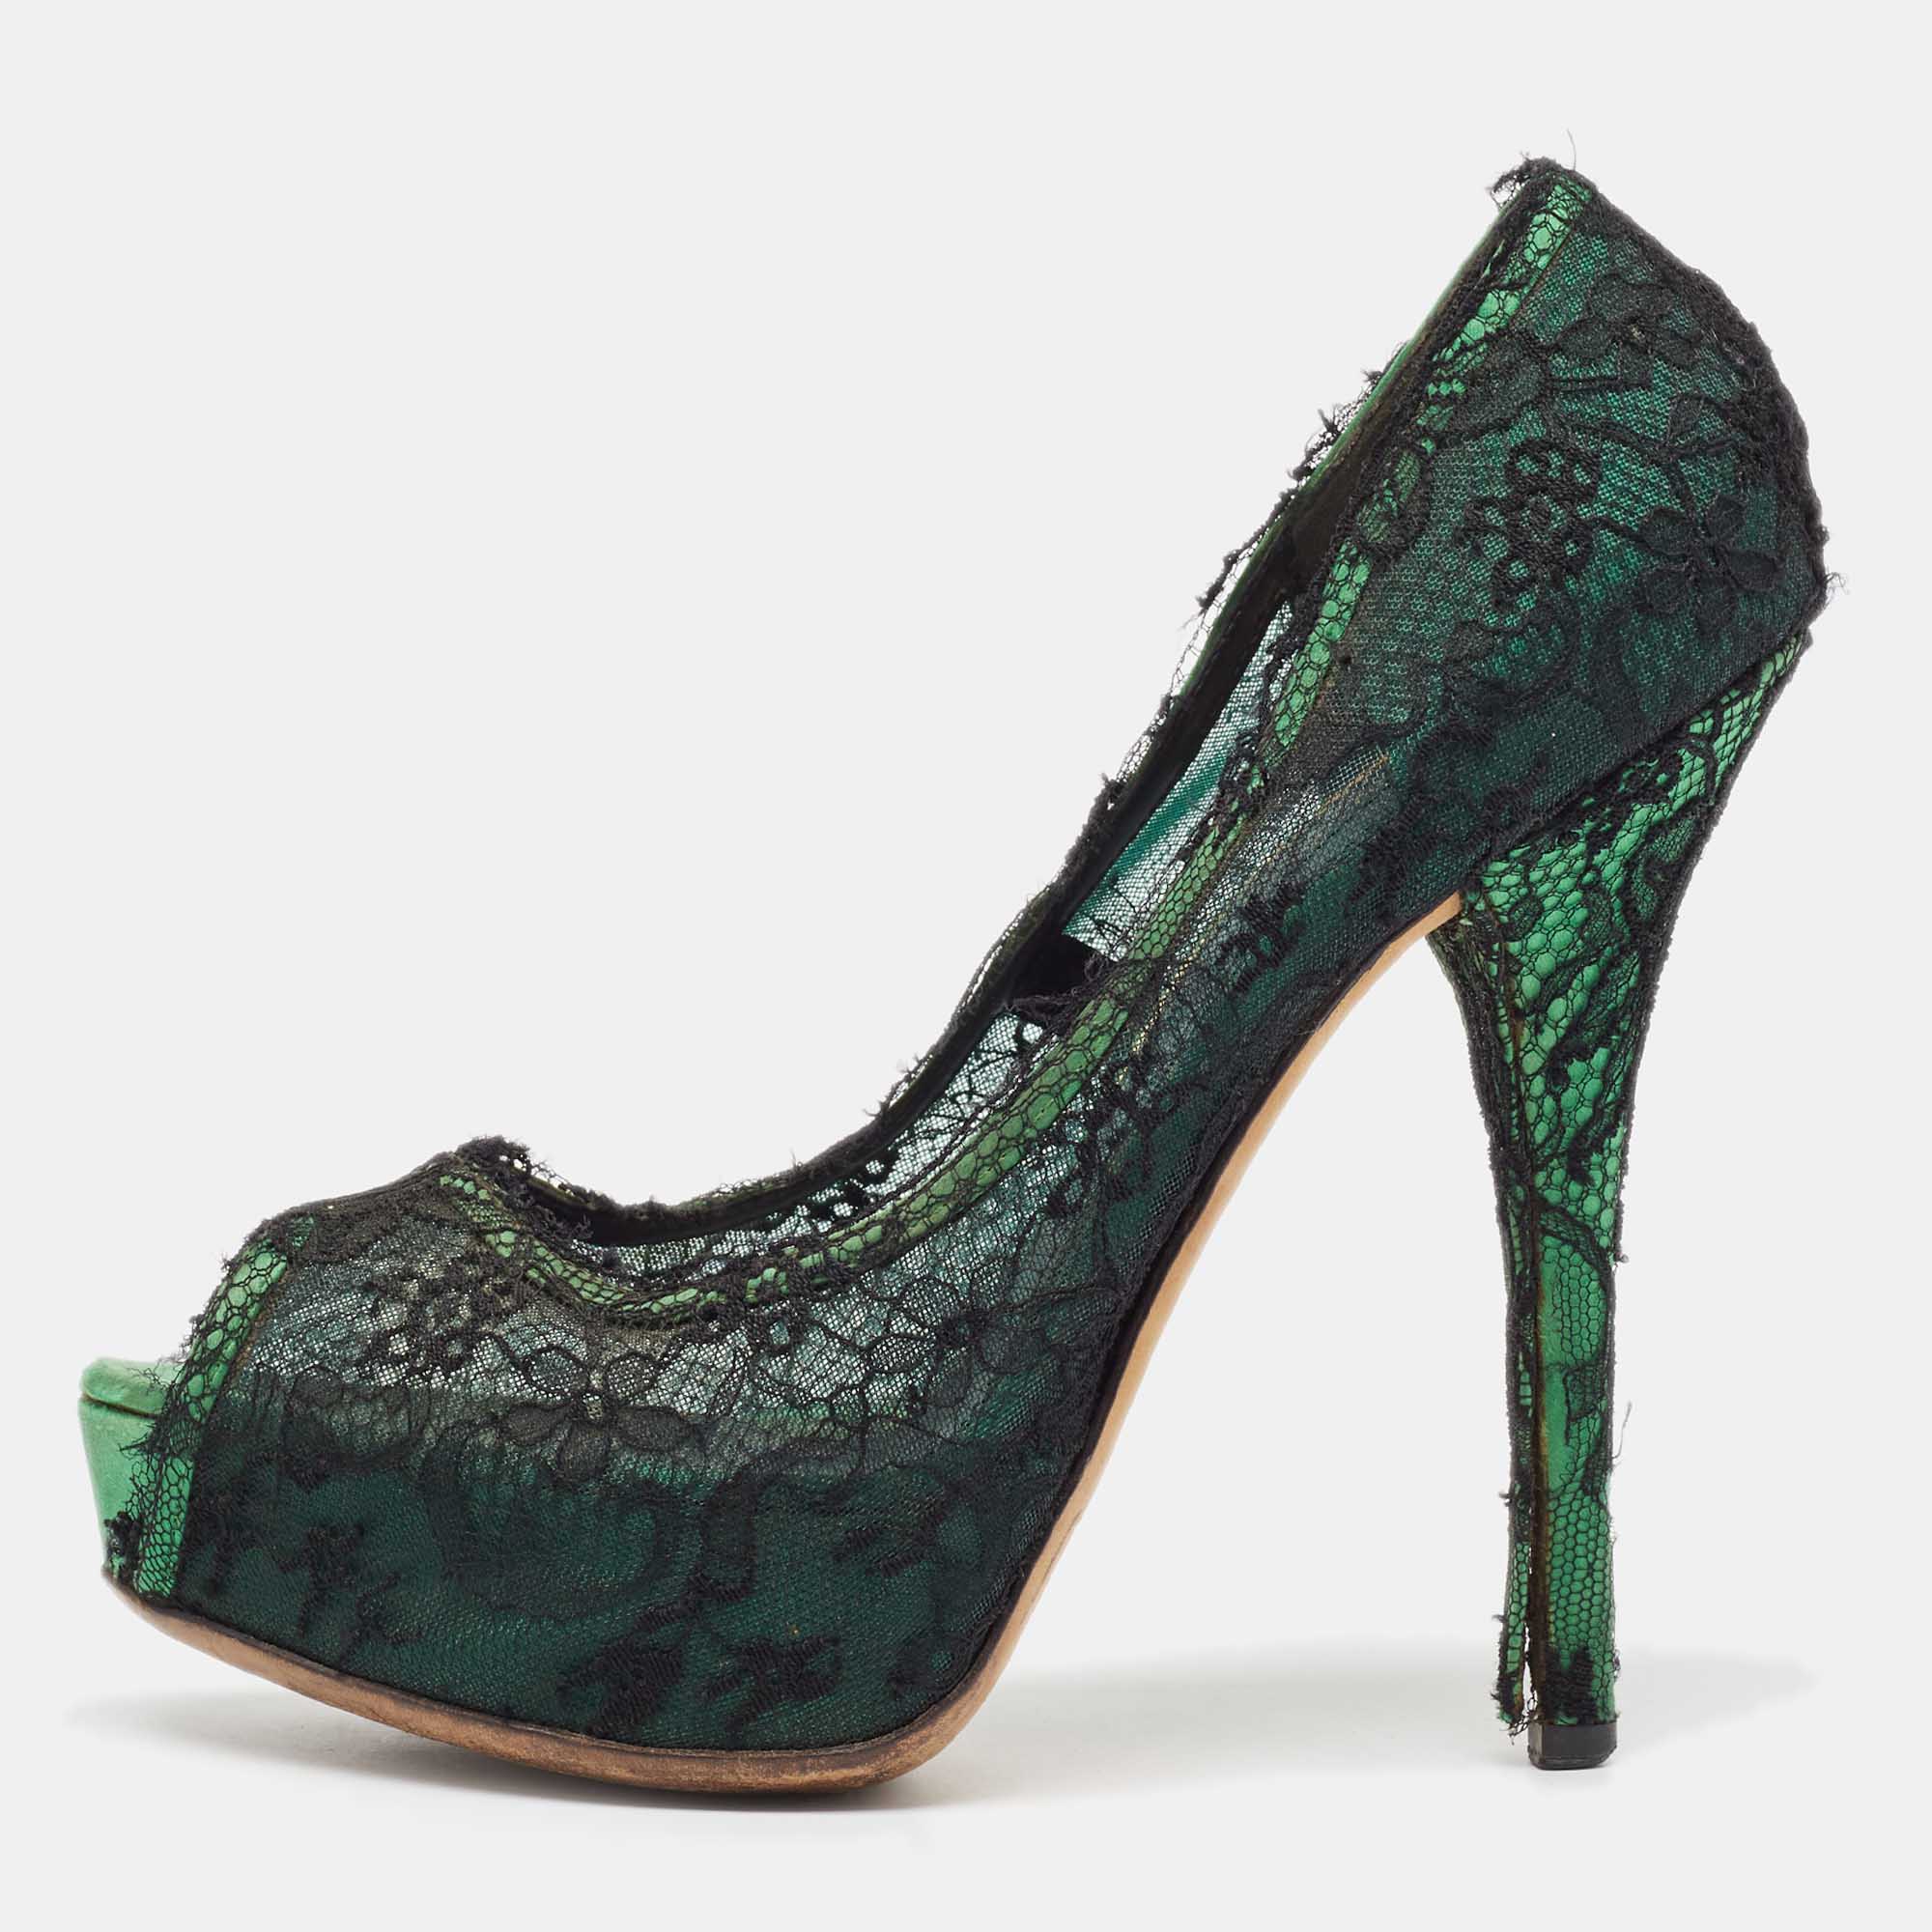 Pre-owned Dolce & Gabbana Black/green Lace And Satin Peep Toe Platform Pumps Size 40